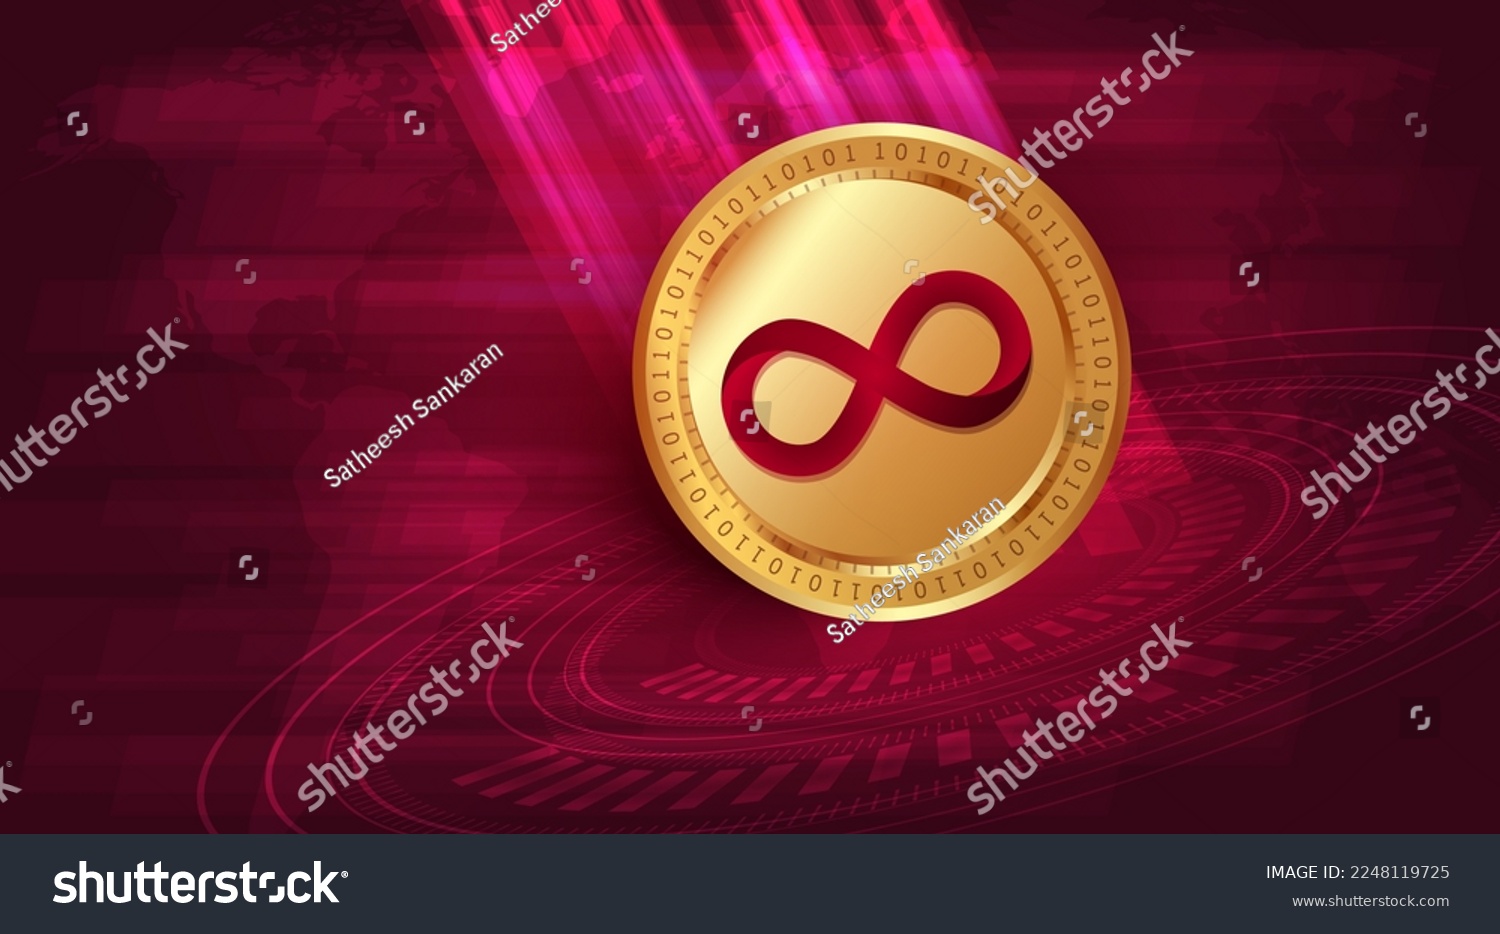 SVG of Internet Computer Protocol (ICP) crypto currency banner and background svg